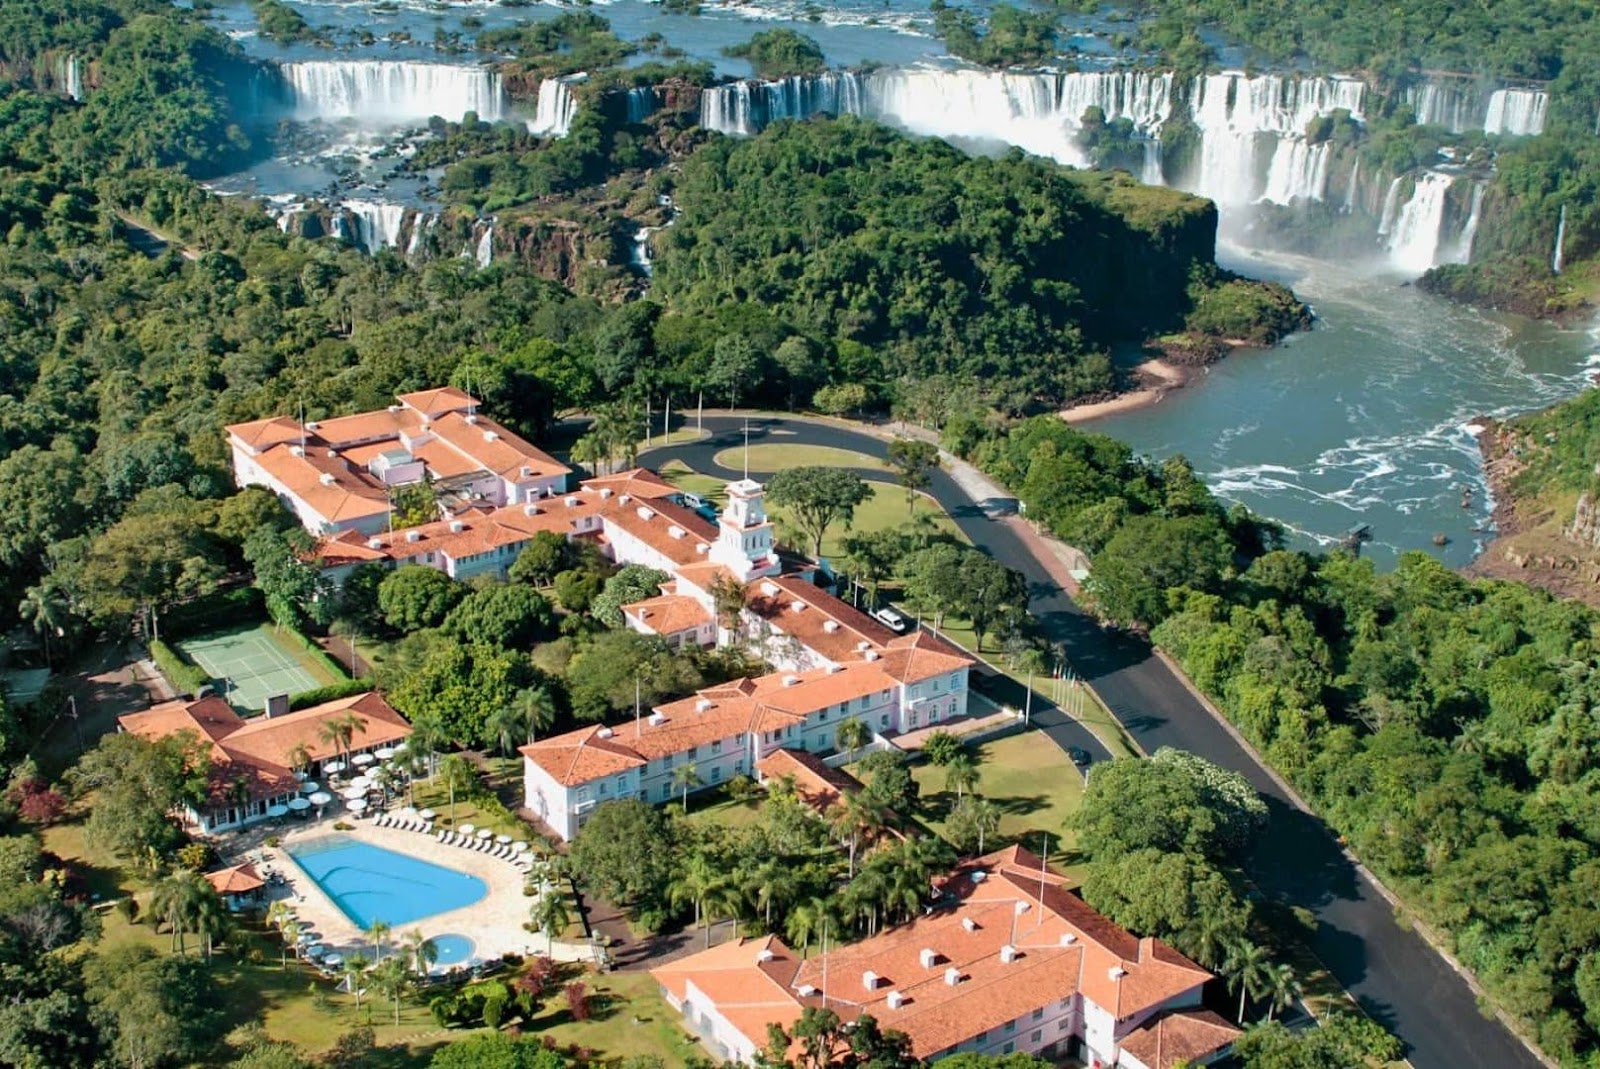 An aerial image of the Belmond Bellini at Iguasso Falls, Brazil